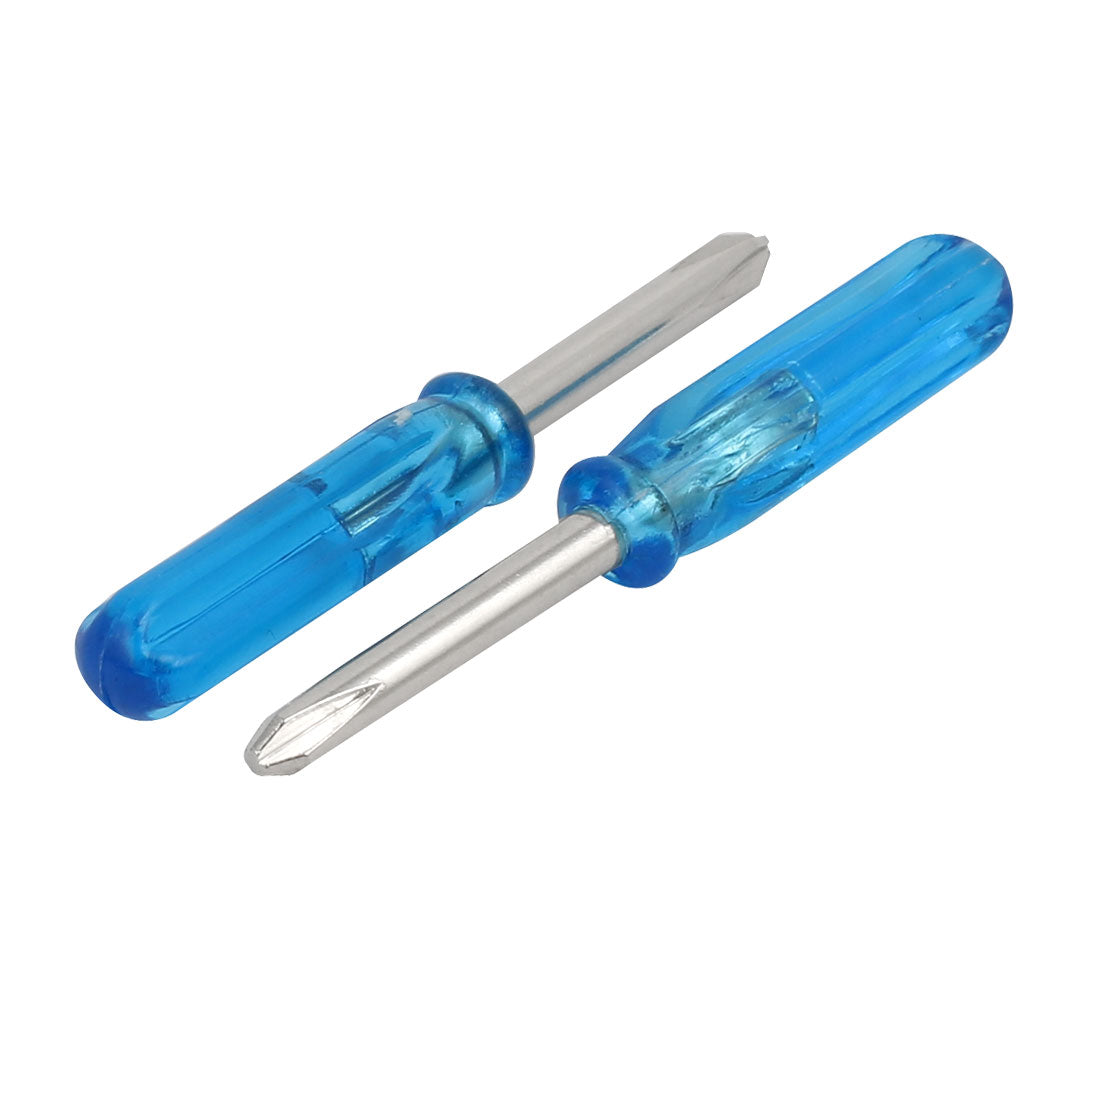 uxcell Uxcell 3mm Tip Plastic Handle Phillips Screwdrivers Driver Repairing Tool Blue 100pcs